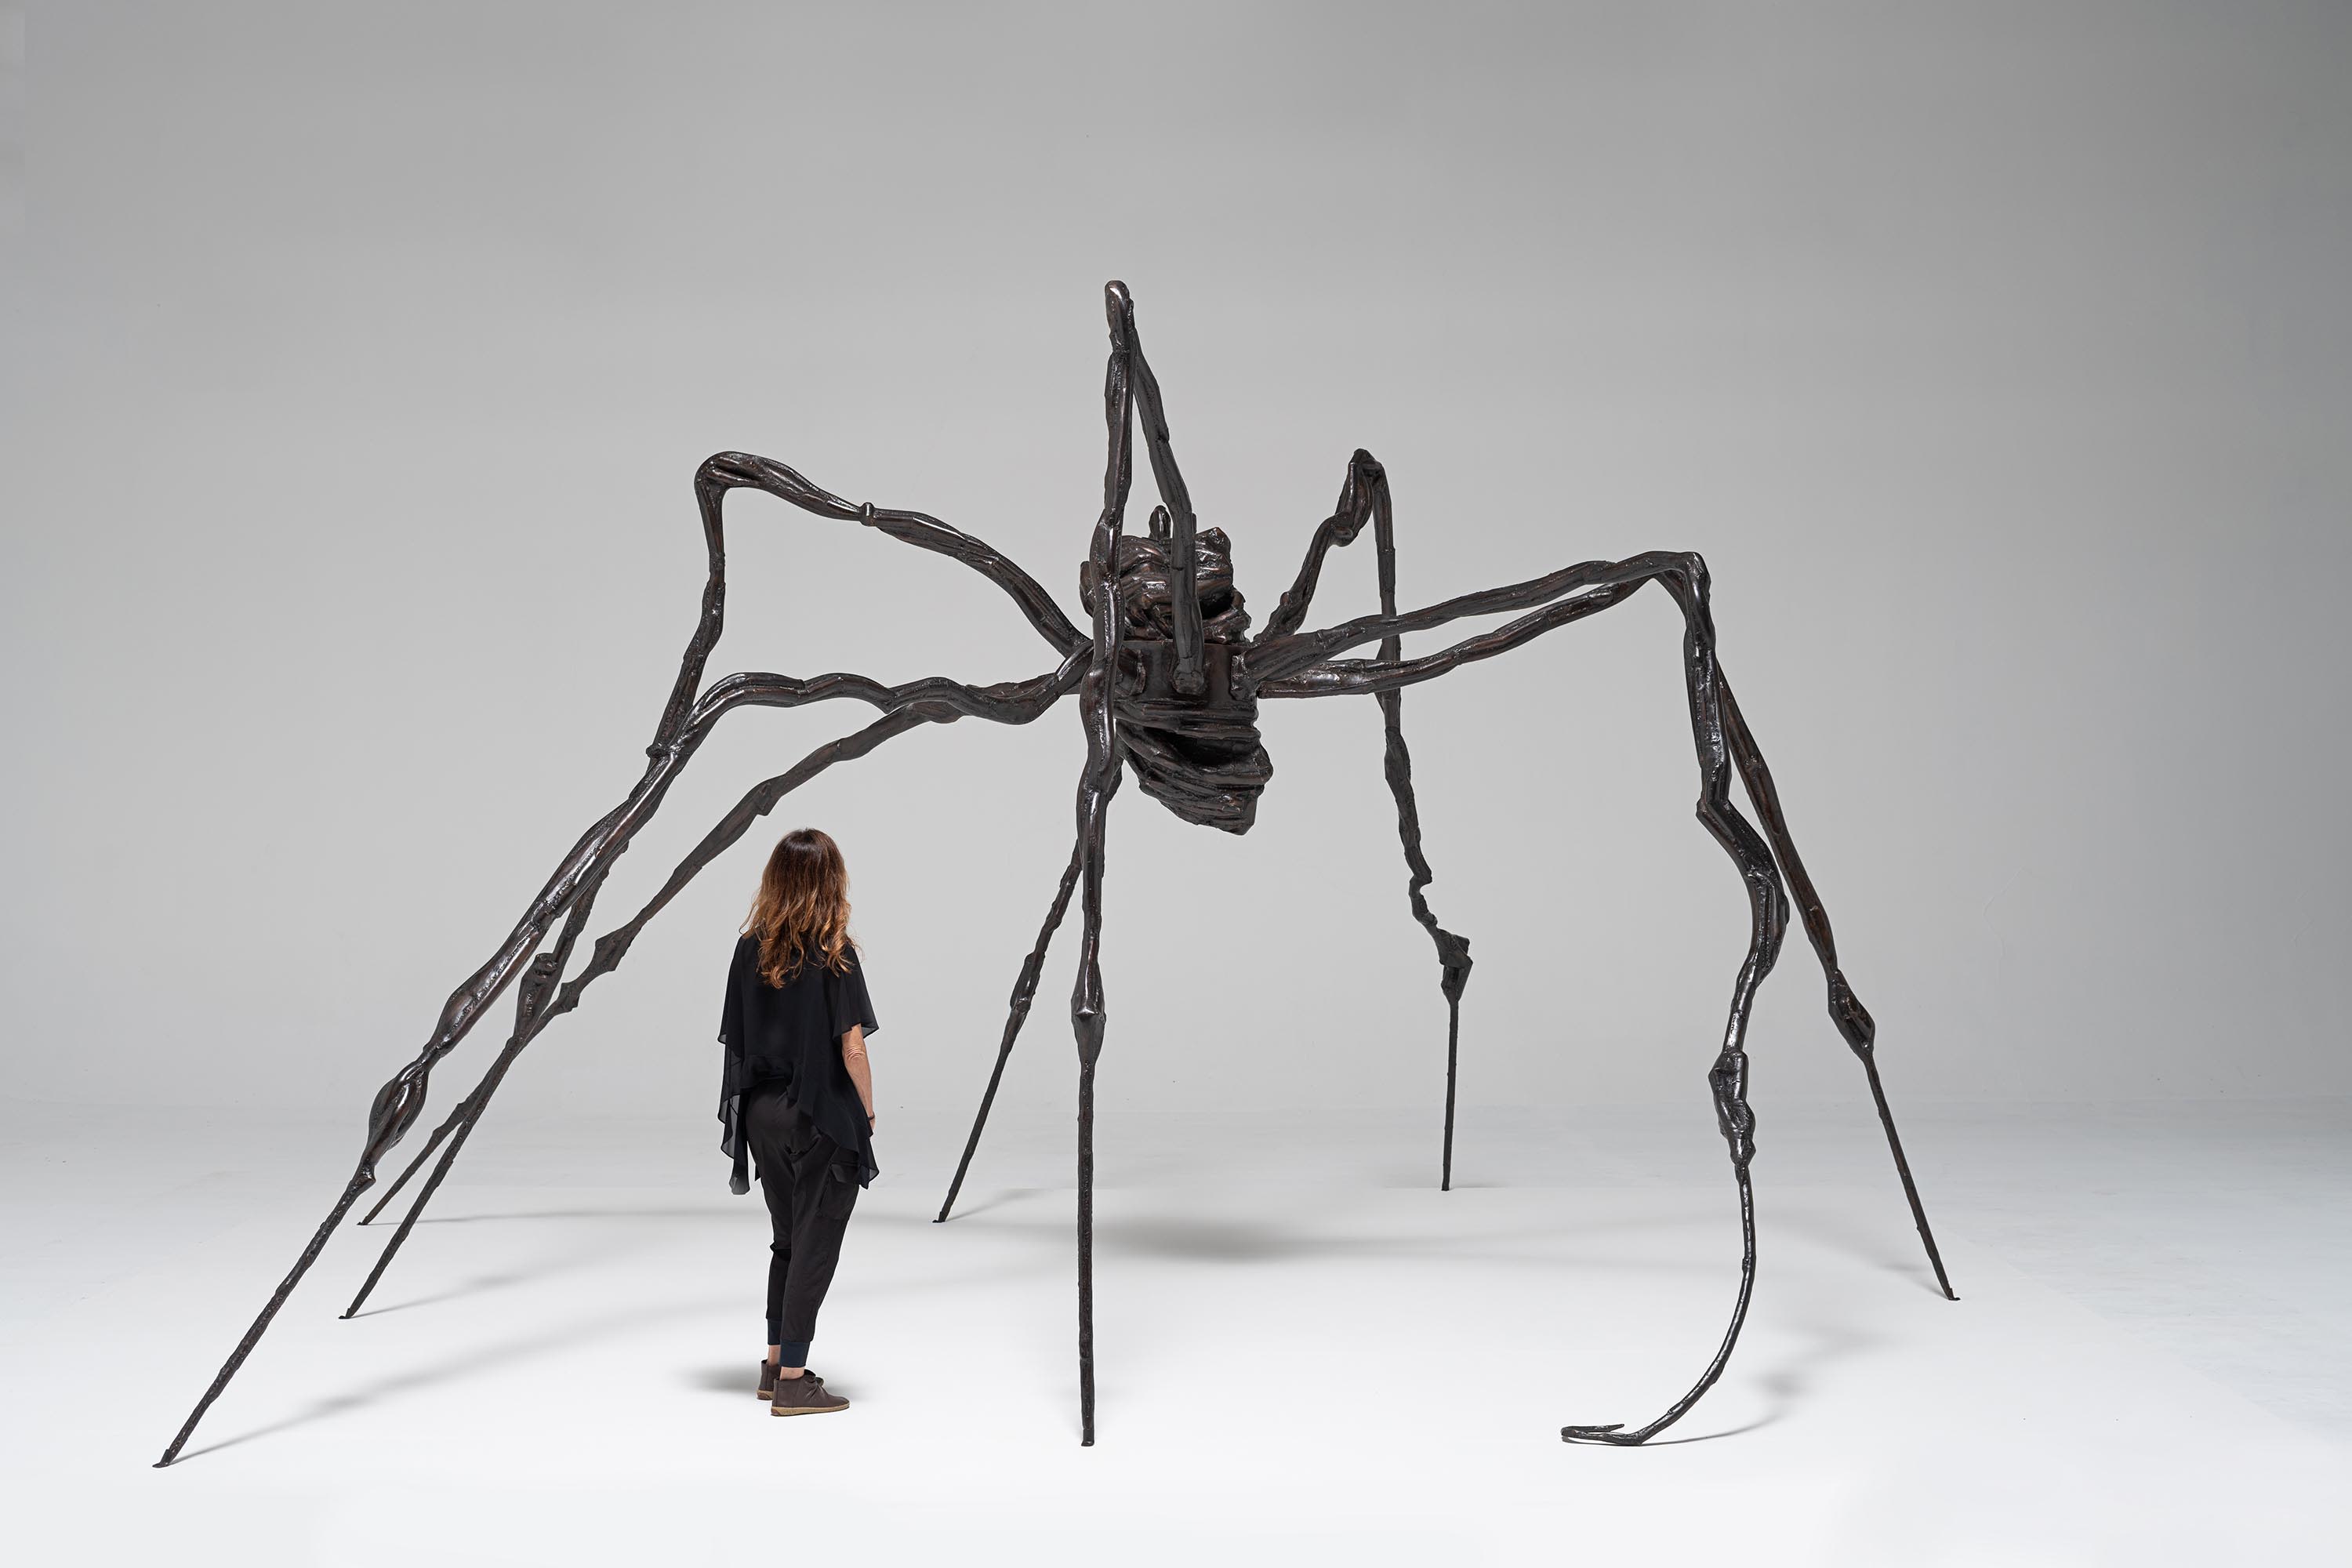 Louise Bourgeois 'Spider' sculpture could fetch $40M at Sotheby's auction